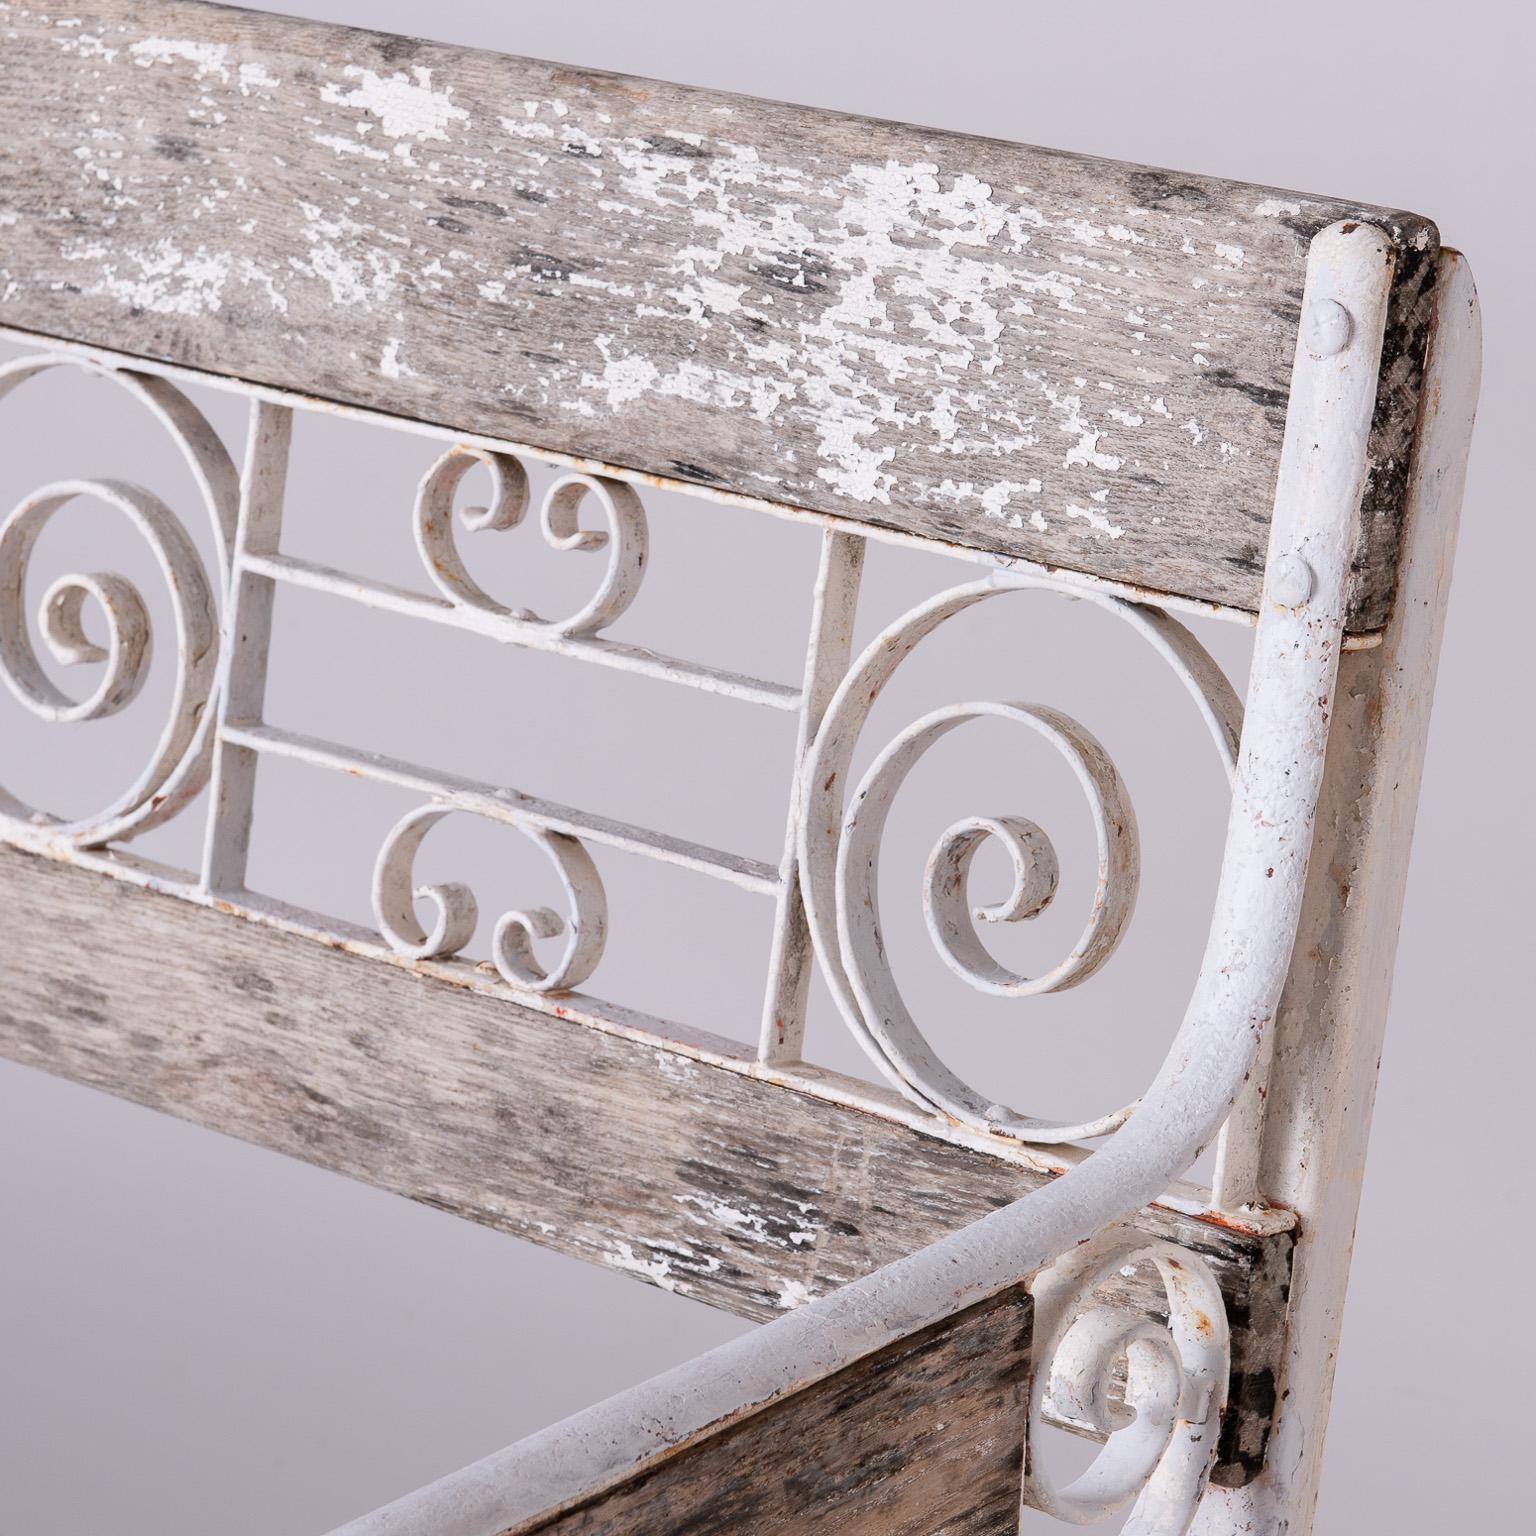 Featuring a classic combination of wood and wrought iron in a decorative pattern, this bench came from a hotel in Vichy, France, a town known for its luxurious spas and healing waters. The wood is nicely aged with traces of white paint remaining,